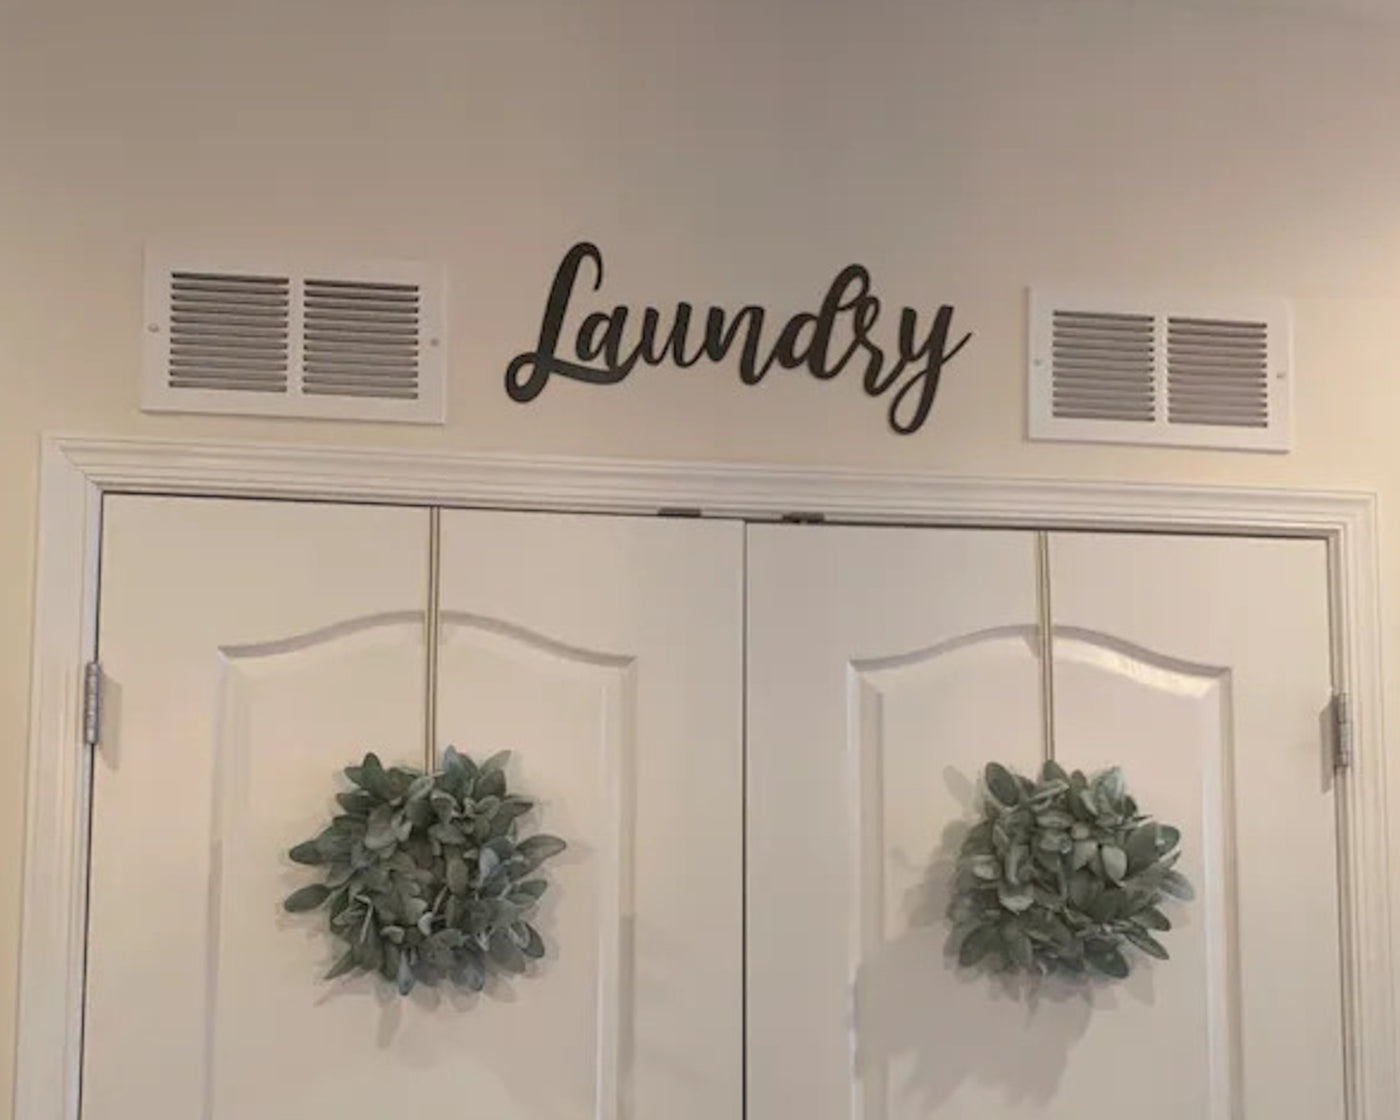 Laundry Room Metal Word Sign - Madison Iron and Wood - Metal Word Art - metal outdoor decor - Steel deocrations - american made products - veteran owned business products - fencing decorations - fencing supplies - custom wall decorations - personalized wall signs - steel - decorative post caps - steel post caps - metal post caps - brackets - structural brackets - home improvement - easter - easter decorations - easter gift - easter yard decor